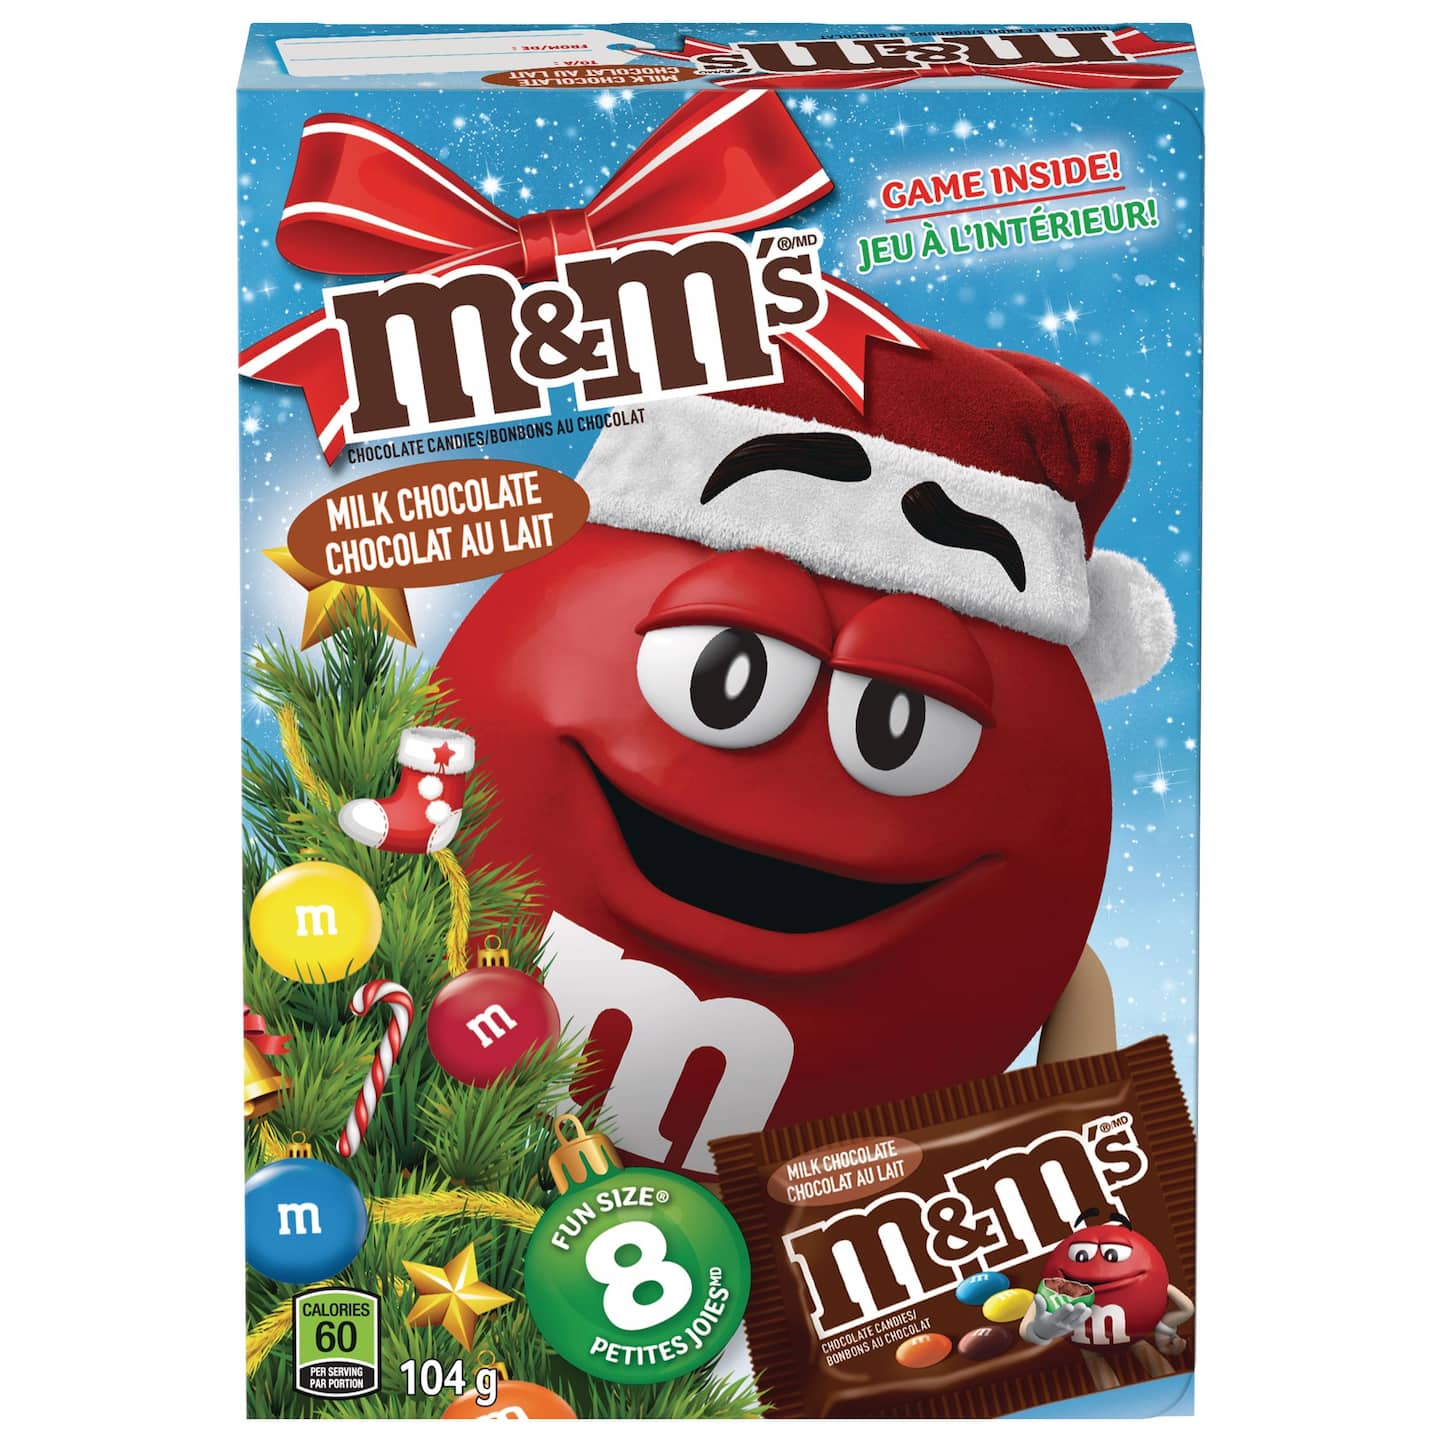 M&M'S Christmas Milk Chocolate Holiday Storybook, 8 Fun Size Bags, 104-g